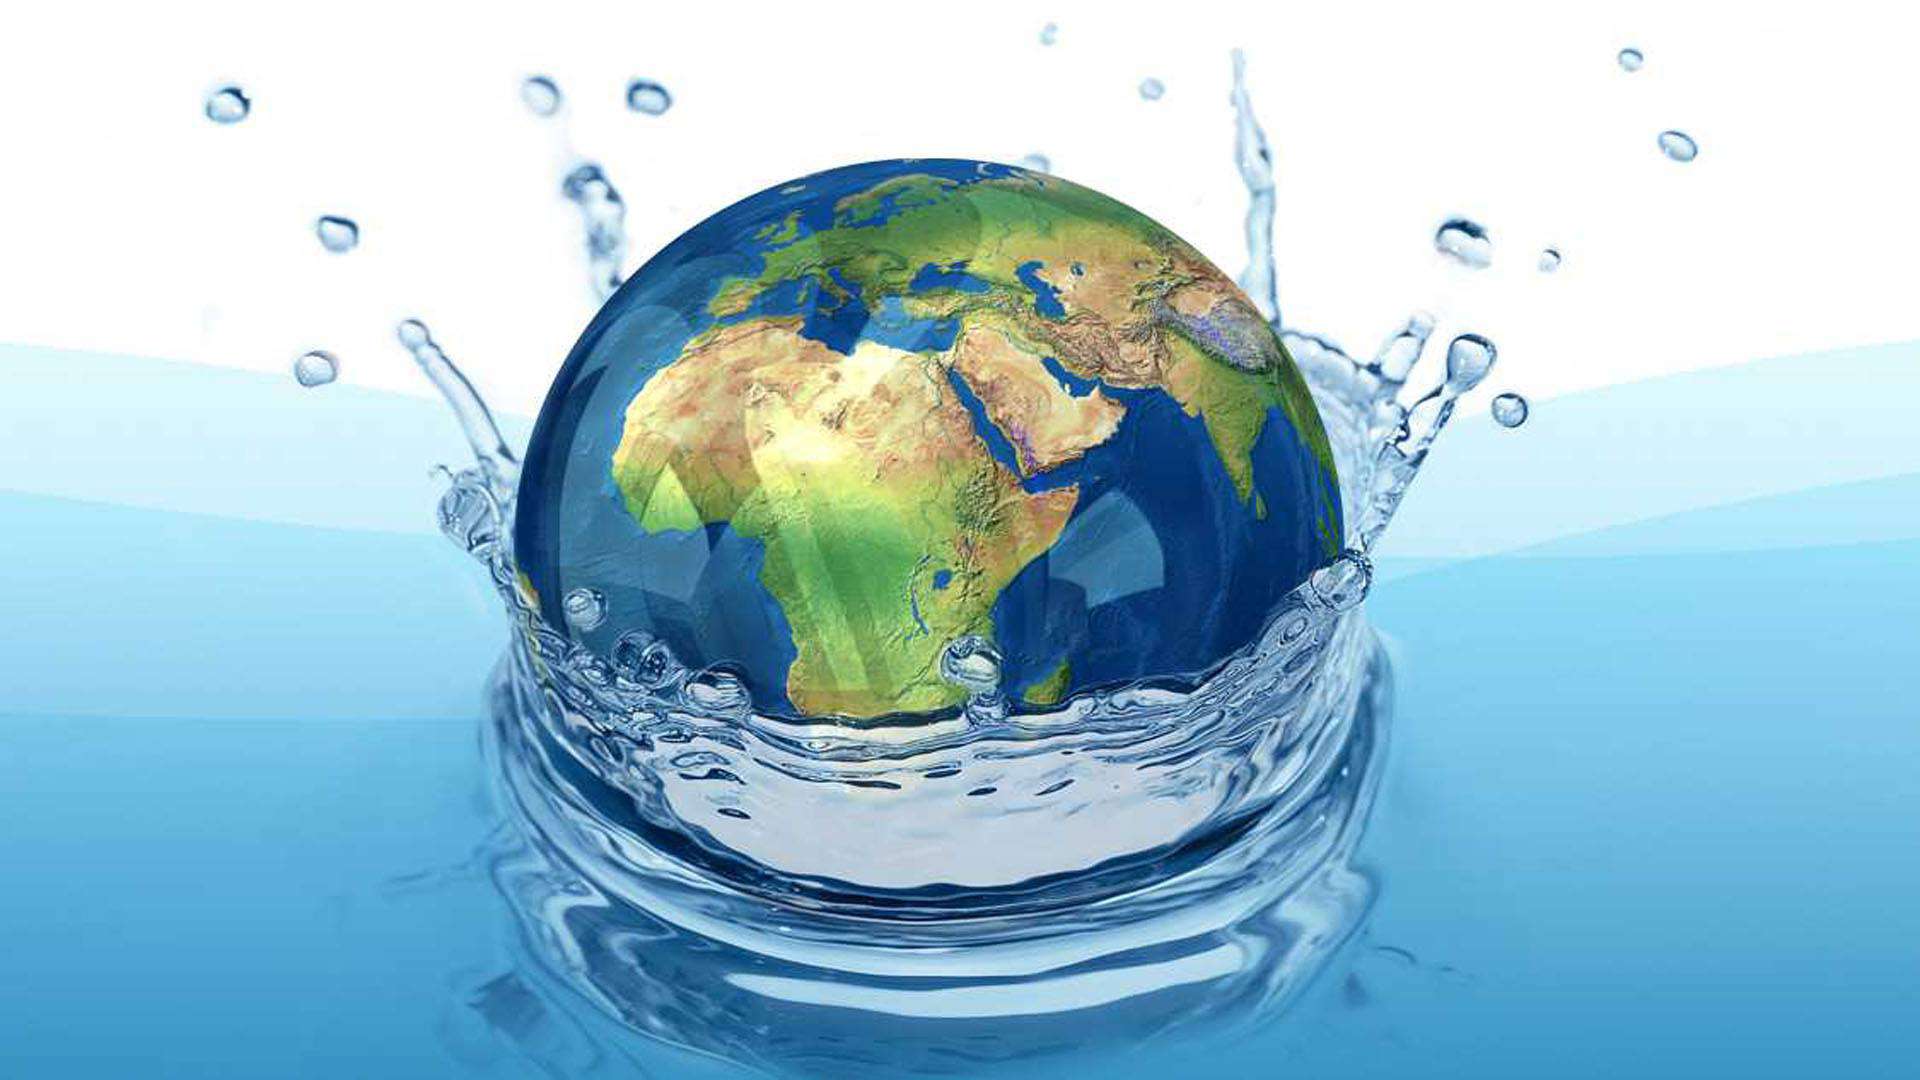 World Water Day Wishes Unique Image